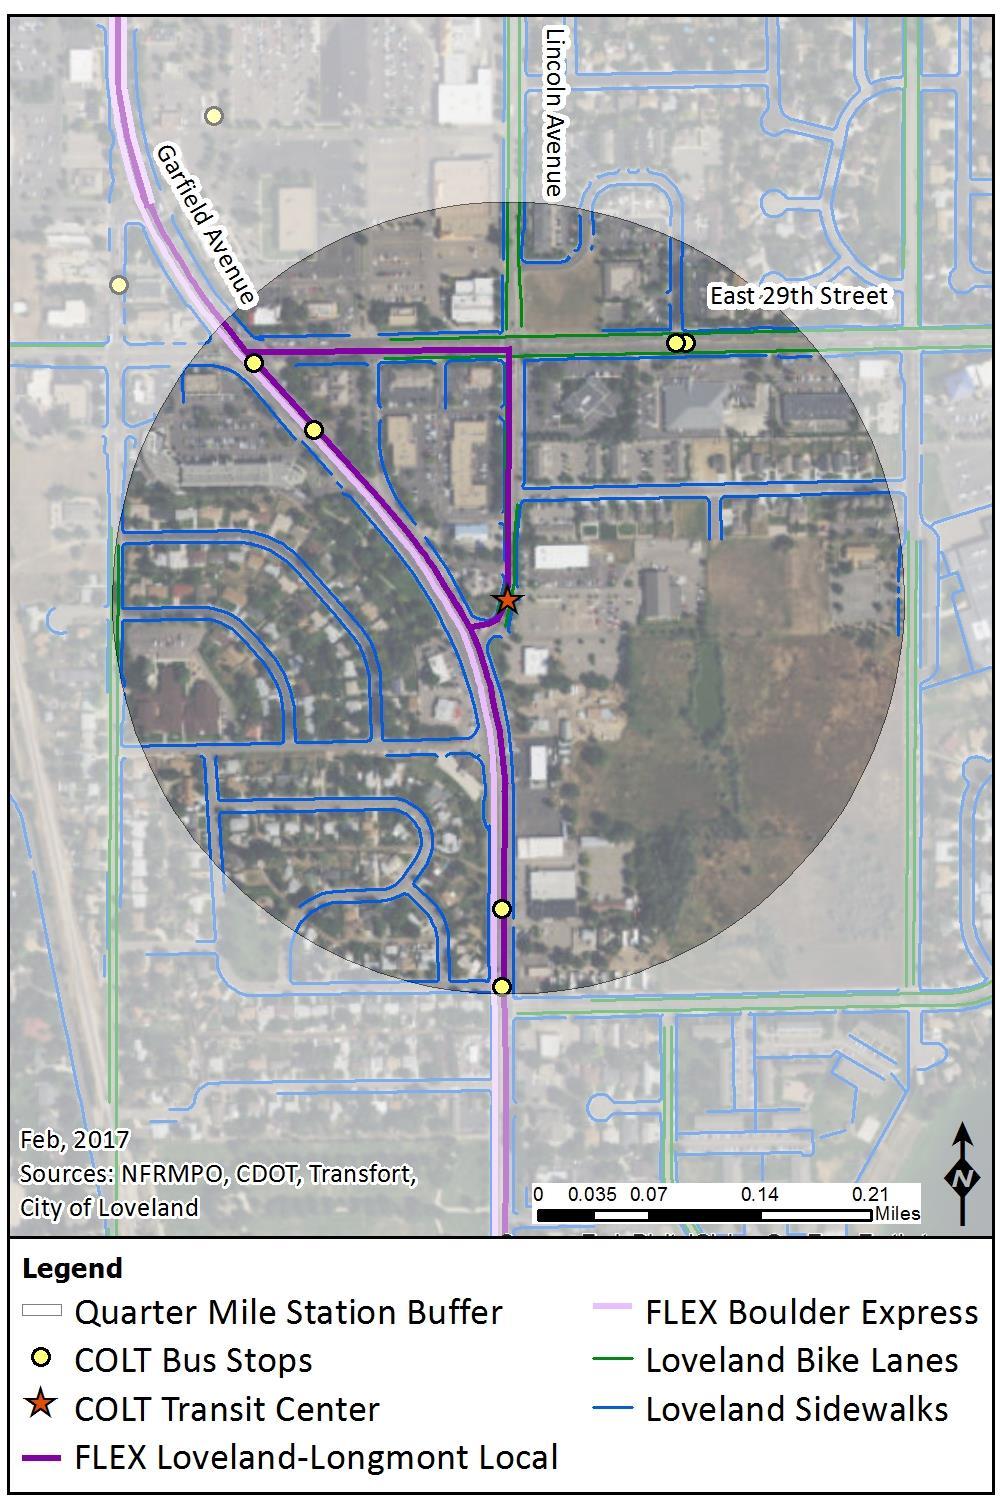 As shown in Figure 3-40, there are sidewalks connecting the Loveland Food Bank to the rest of the Loveland sidewalk network.